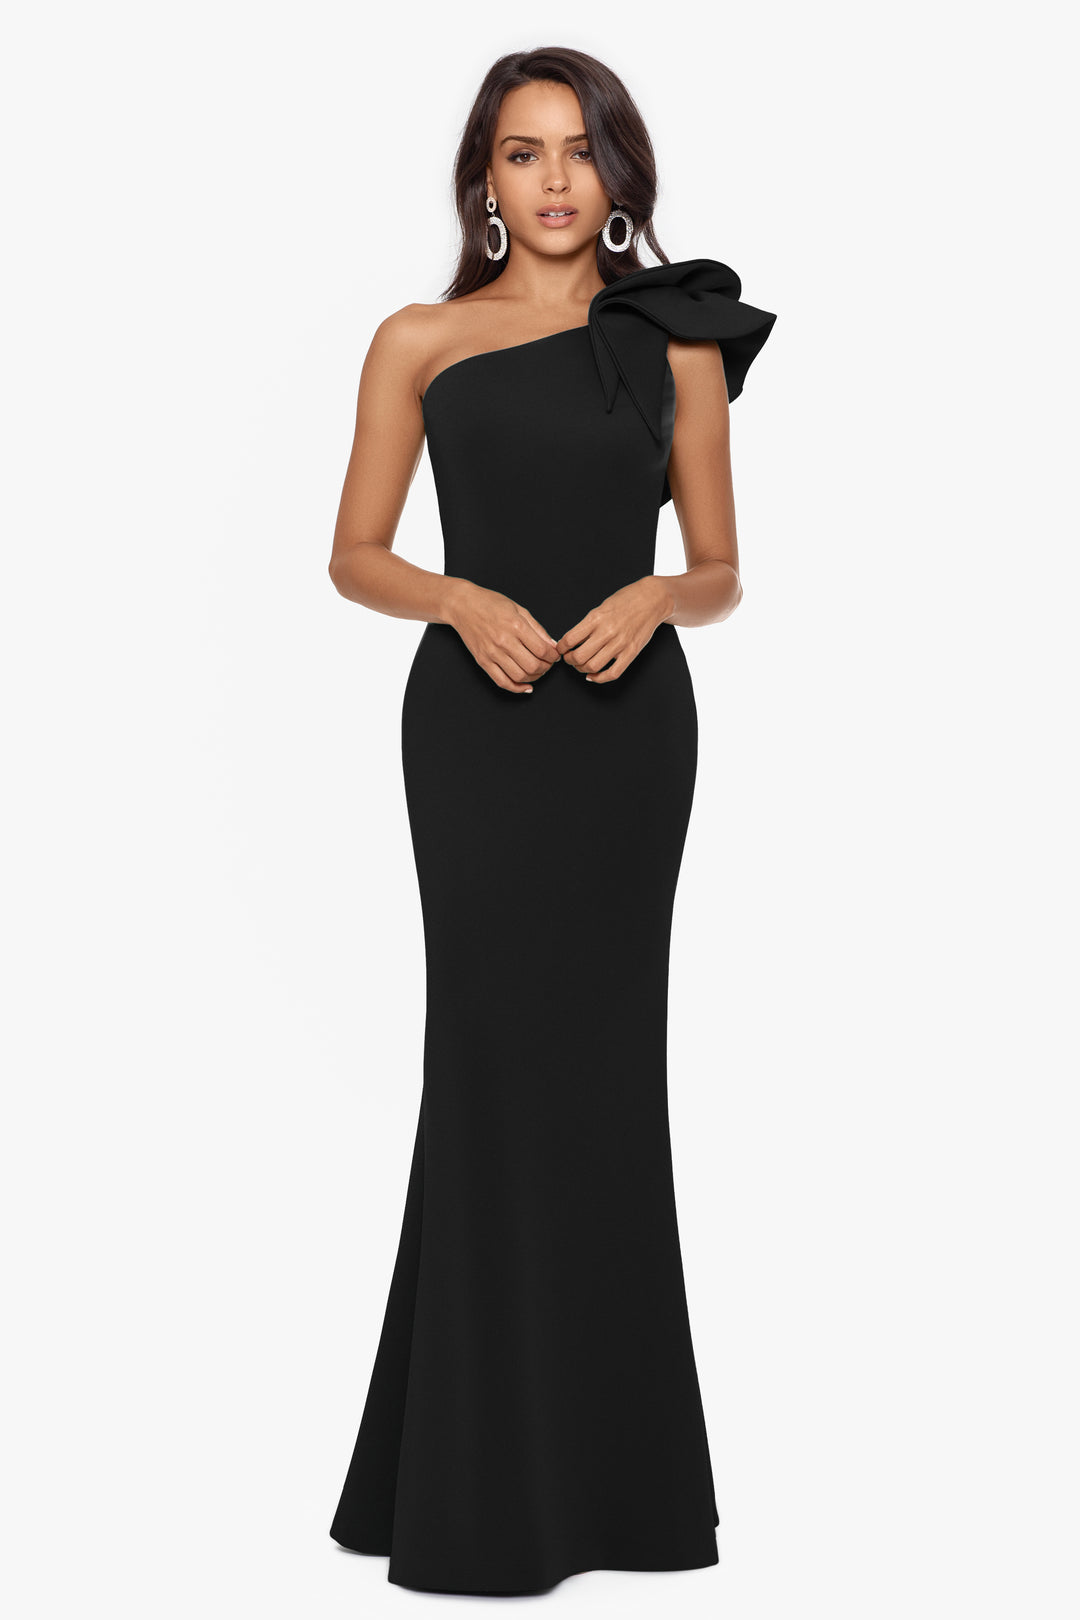 Daisy off shoulder bodycon fitted party ball dress